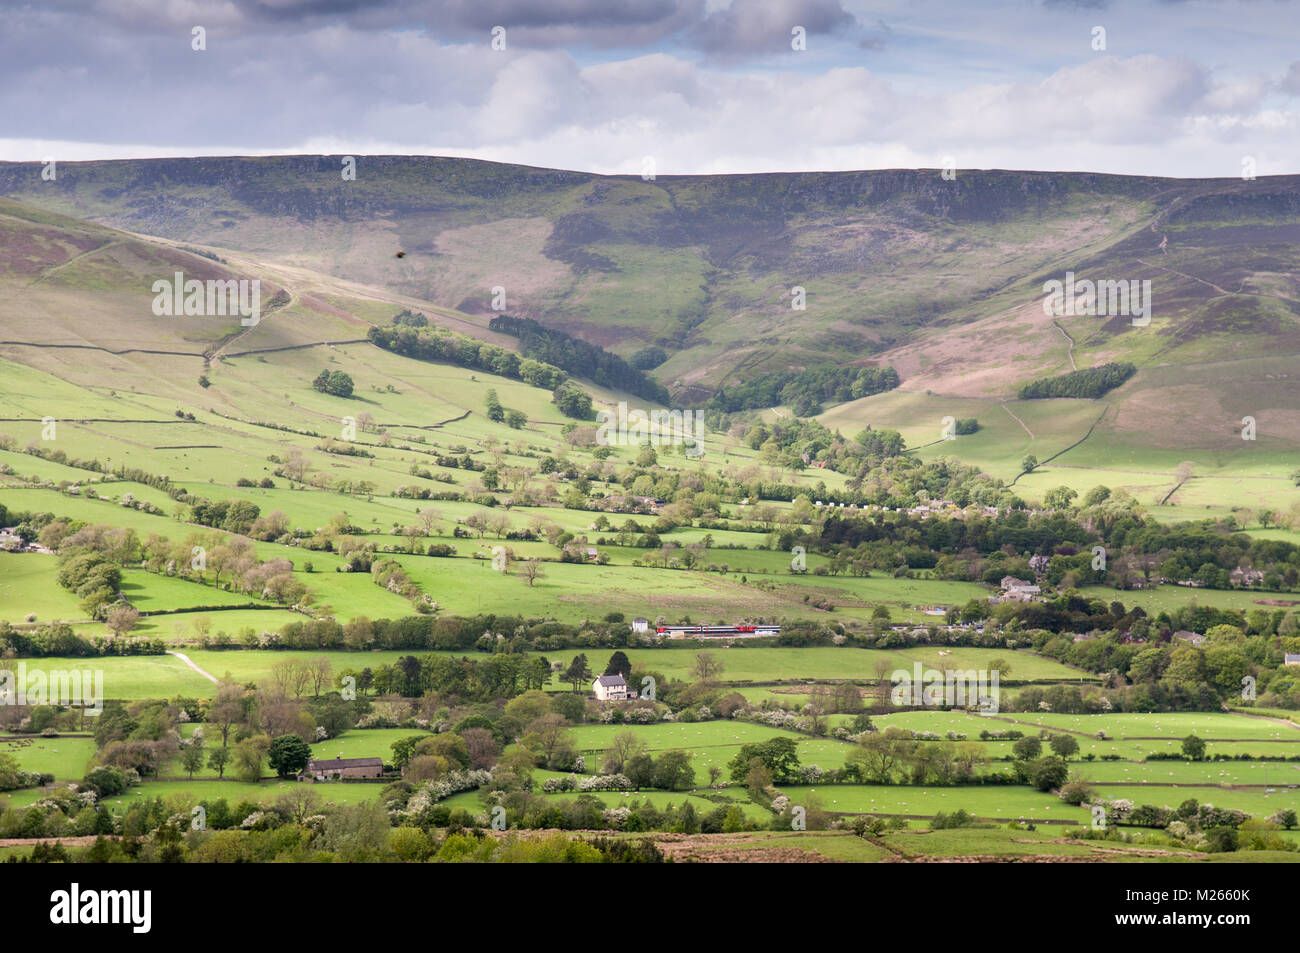 The moorland plateau of Kinder Scout rises above the lush pasture fields of Edale valley in Derbyshire, in England's Peak District National Park. Stock Photo